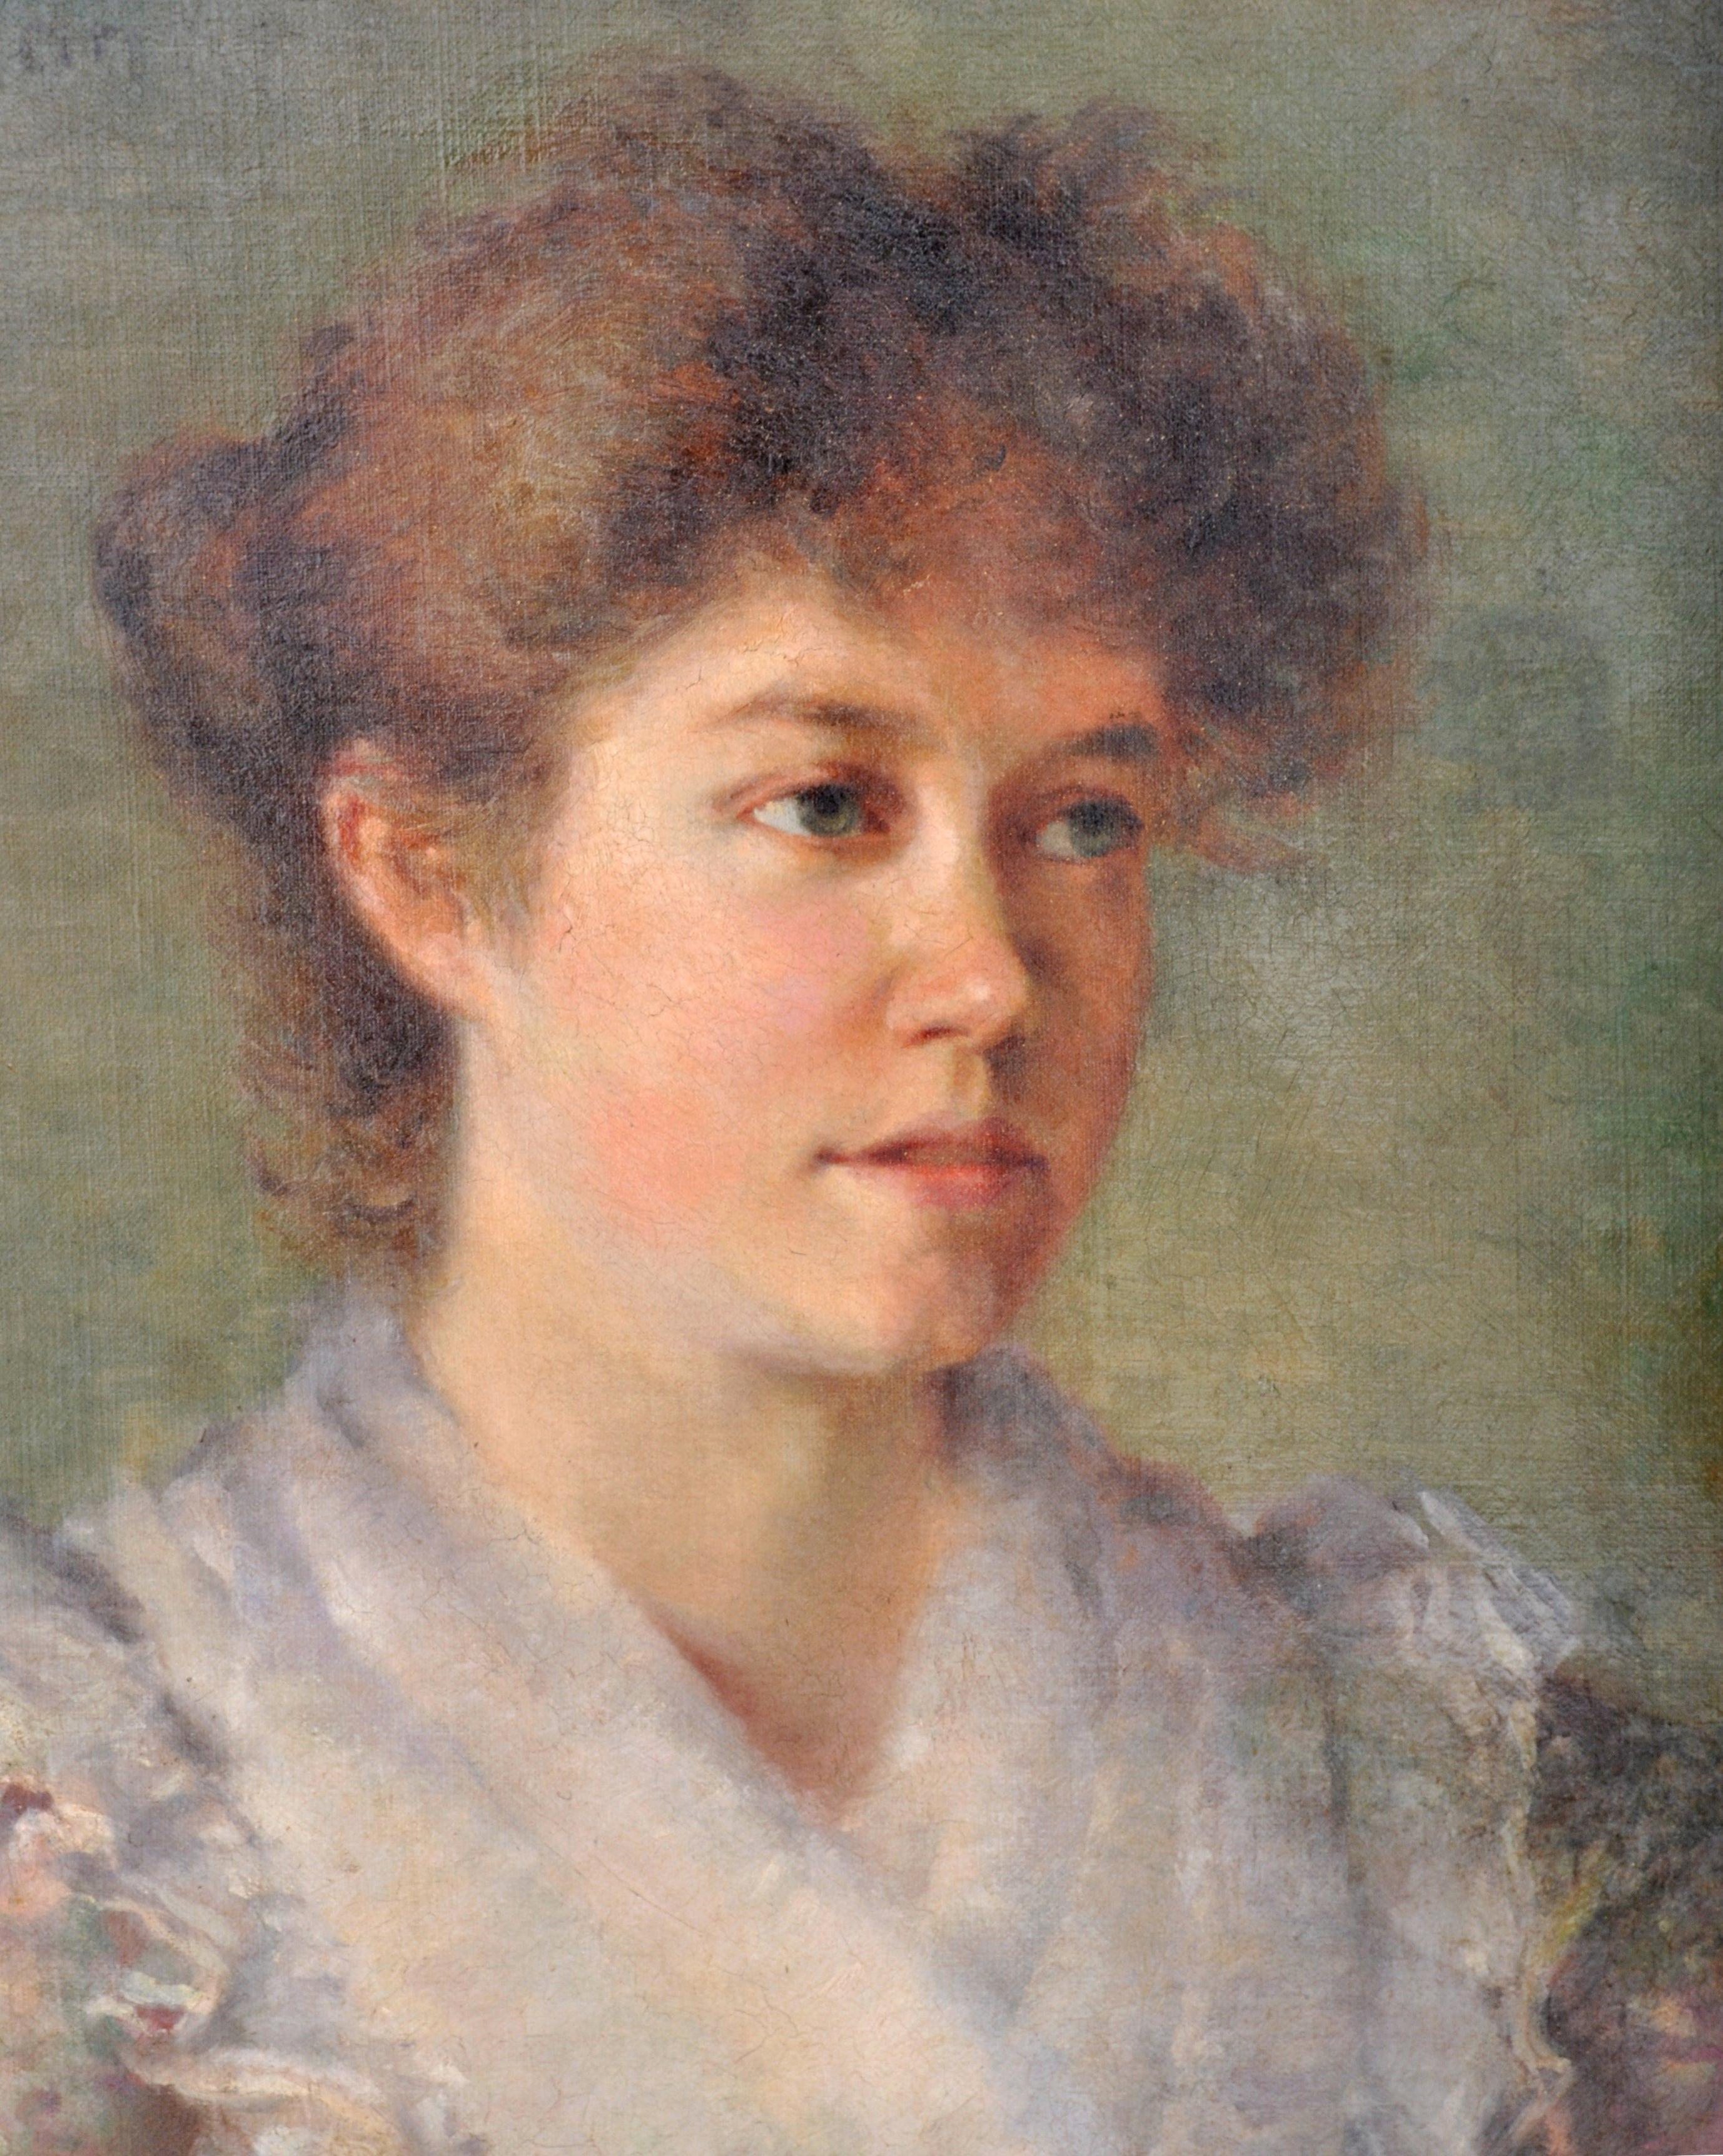 Antique Late 19th Century English Oil on Canvas Painting Female Portrait 1900 - Brown Portrait Painting by F. Norman